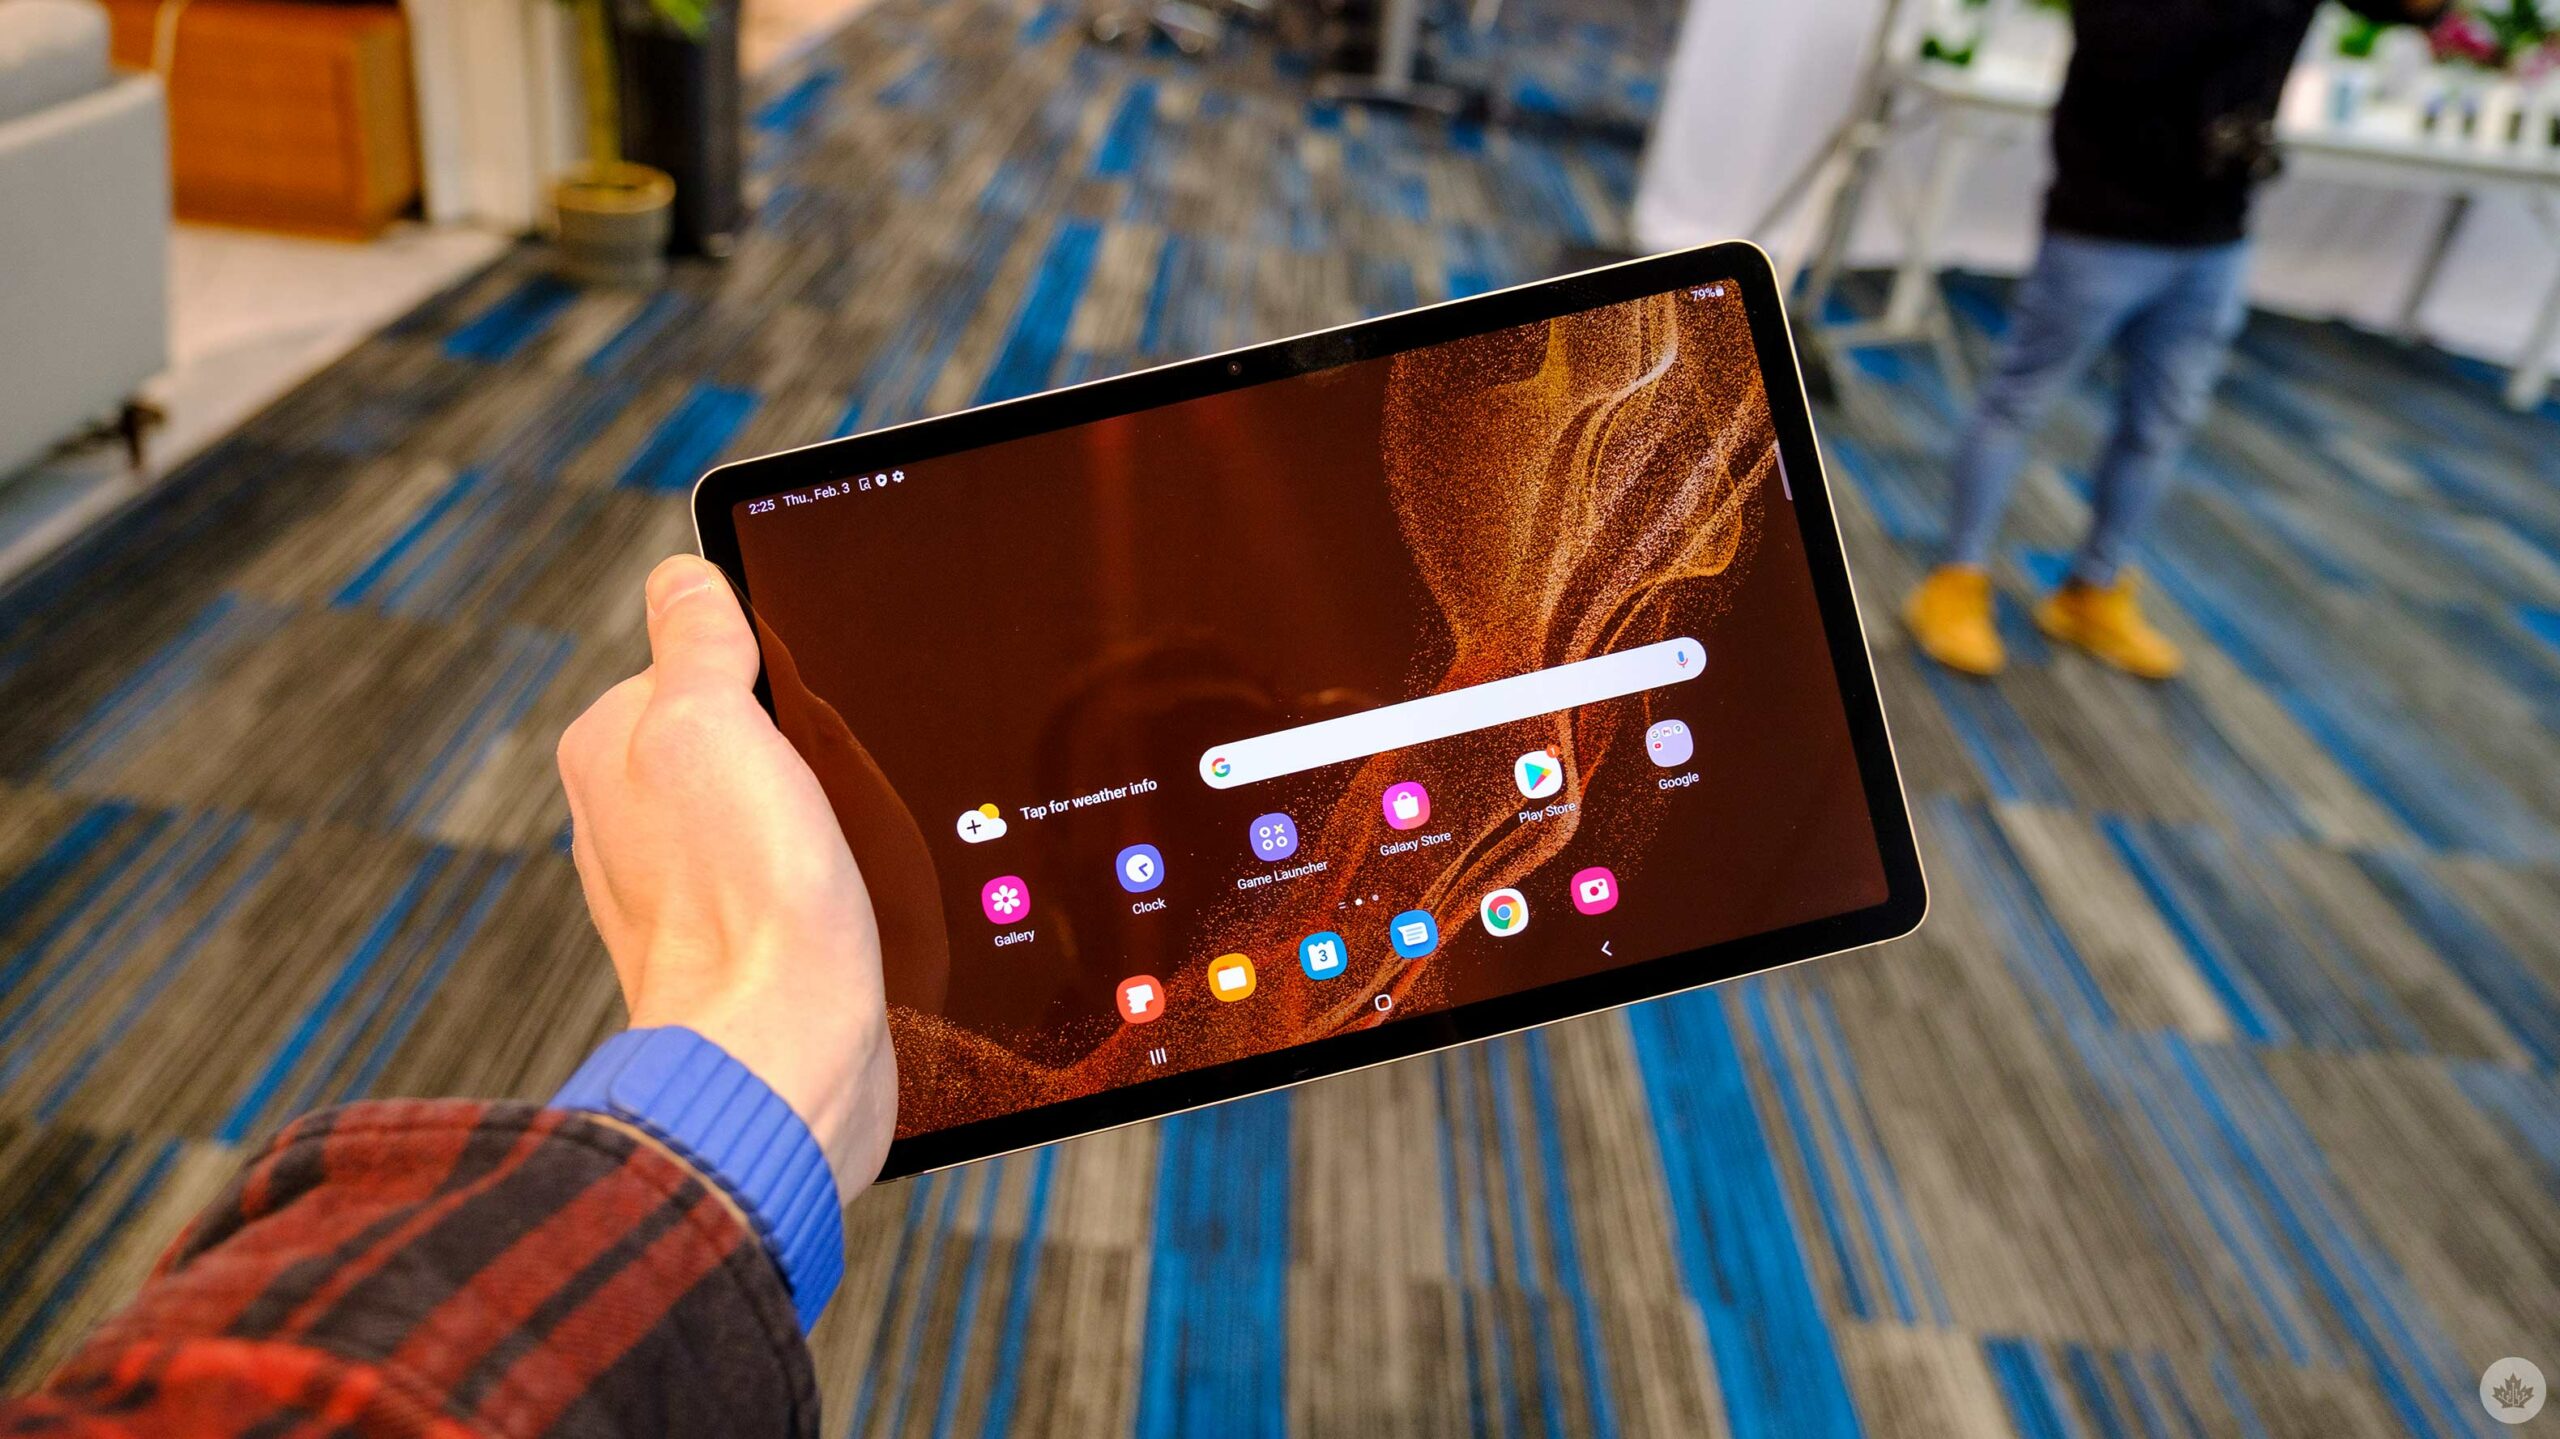 Samsung Galaxy Tab S8 receives One UI 5.1 update, gets lots of new features  - SamMobile